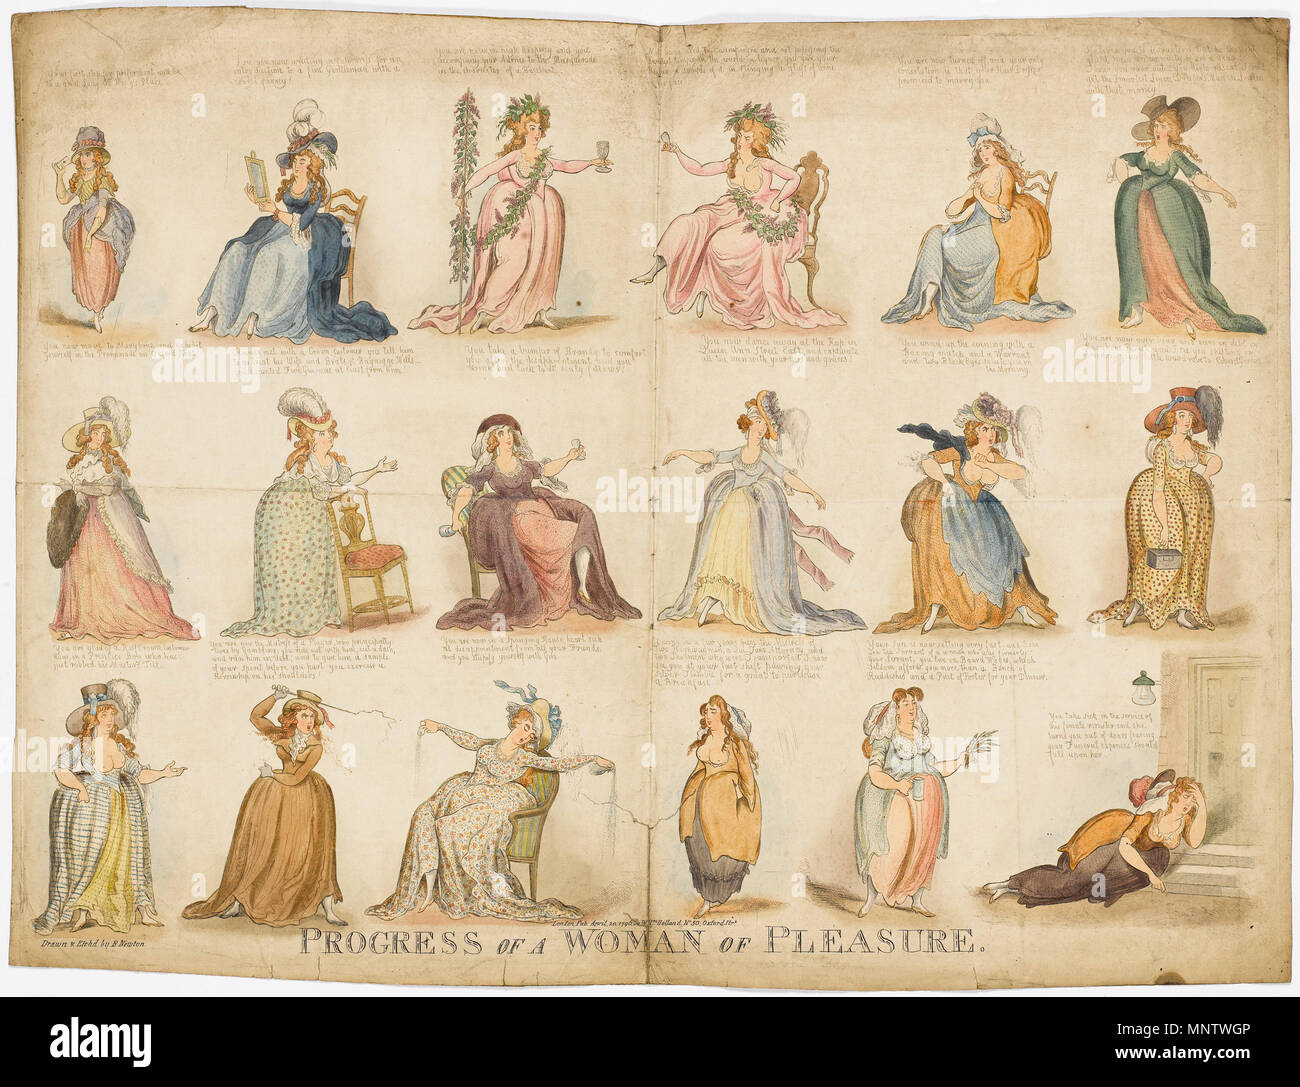 . English: Progress of a Woman of Pleasure. Hand-coloured etching, on wove. 53.5 x 74.0 cm. William Holland, 20 April, 1796. Traces the progress of a woman who starts as a newly-hired servant at upper left, and then through impulsive behavior and a fondness for alcohol loses 'respectable' employment, and descends into sordid circumstances, including prostitution, being the mistress of a number of men, associating with criminals, etc. 1796. Richard Newton 1060 Richard Newton Progress of a Woman of Pleasure 1794 Stock Photo